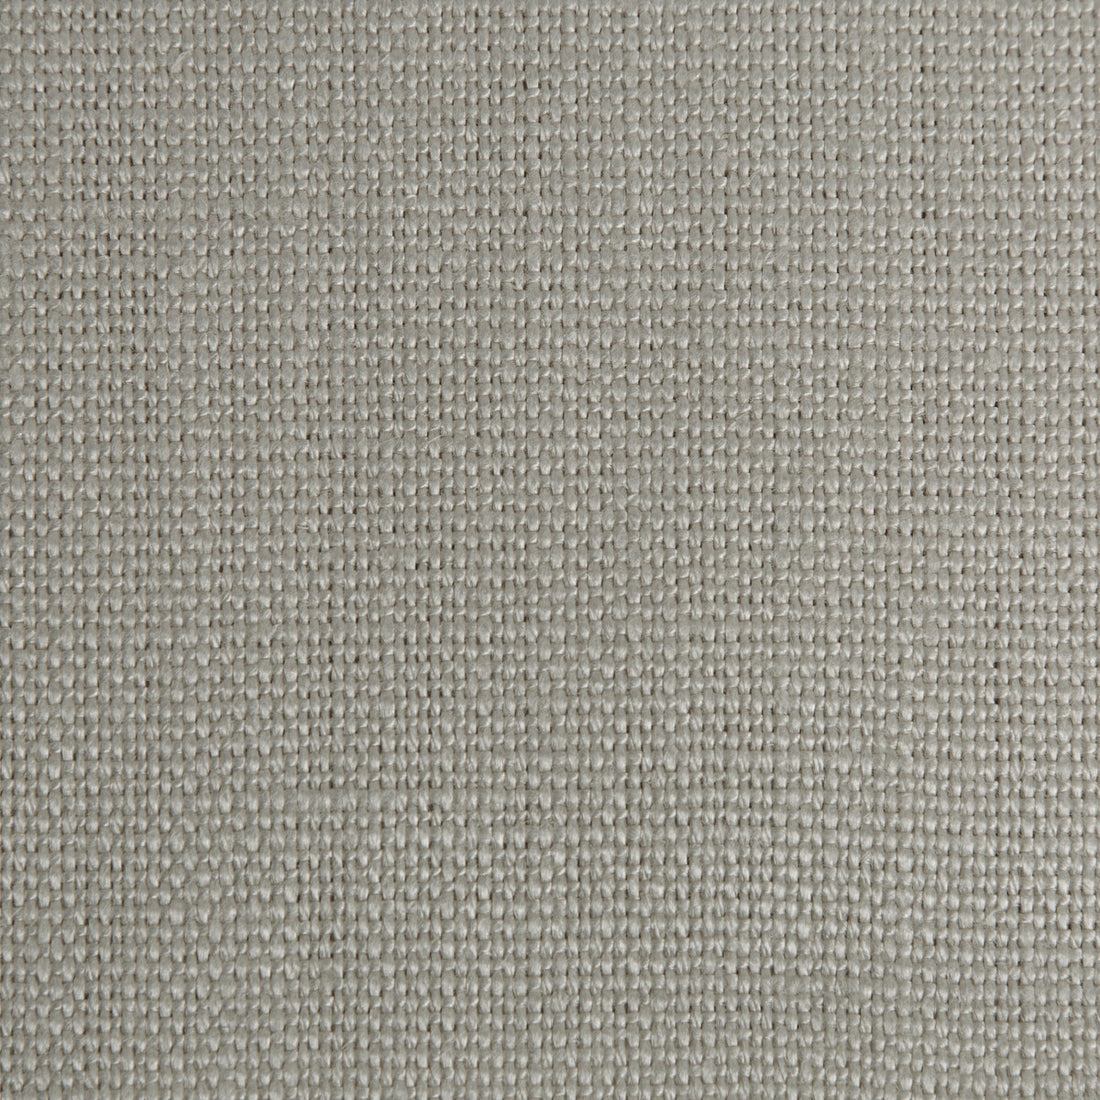 Adriano fabric in sterling color - pattern 33725.2111.0 - by Kravet Basics in the Jeffrey Alan Marks collection